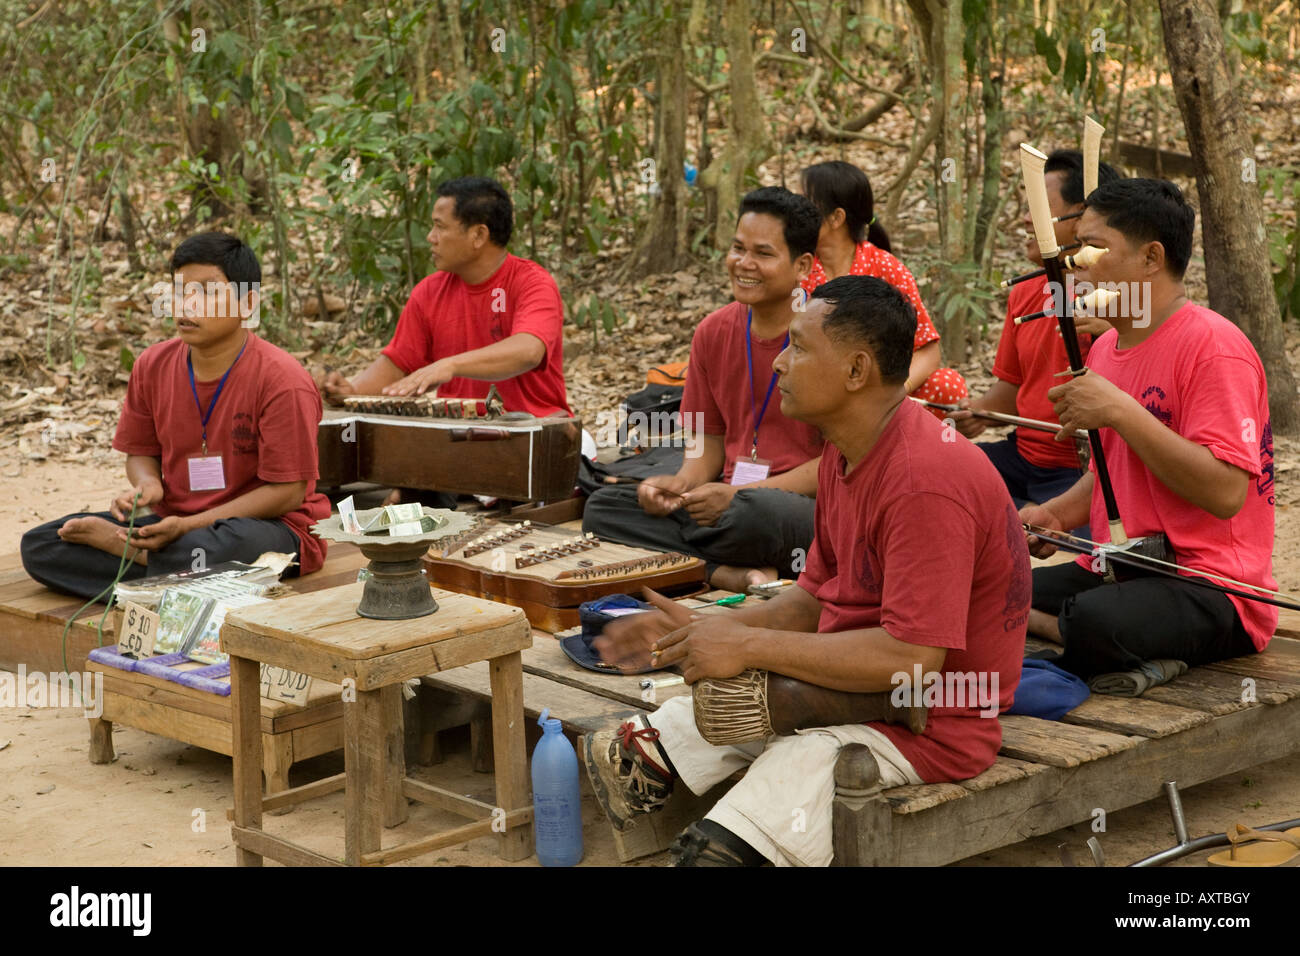 A band comprised of victims of landmines plays music for tourists in Cambodia Stock Photo